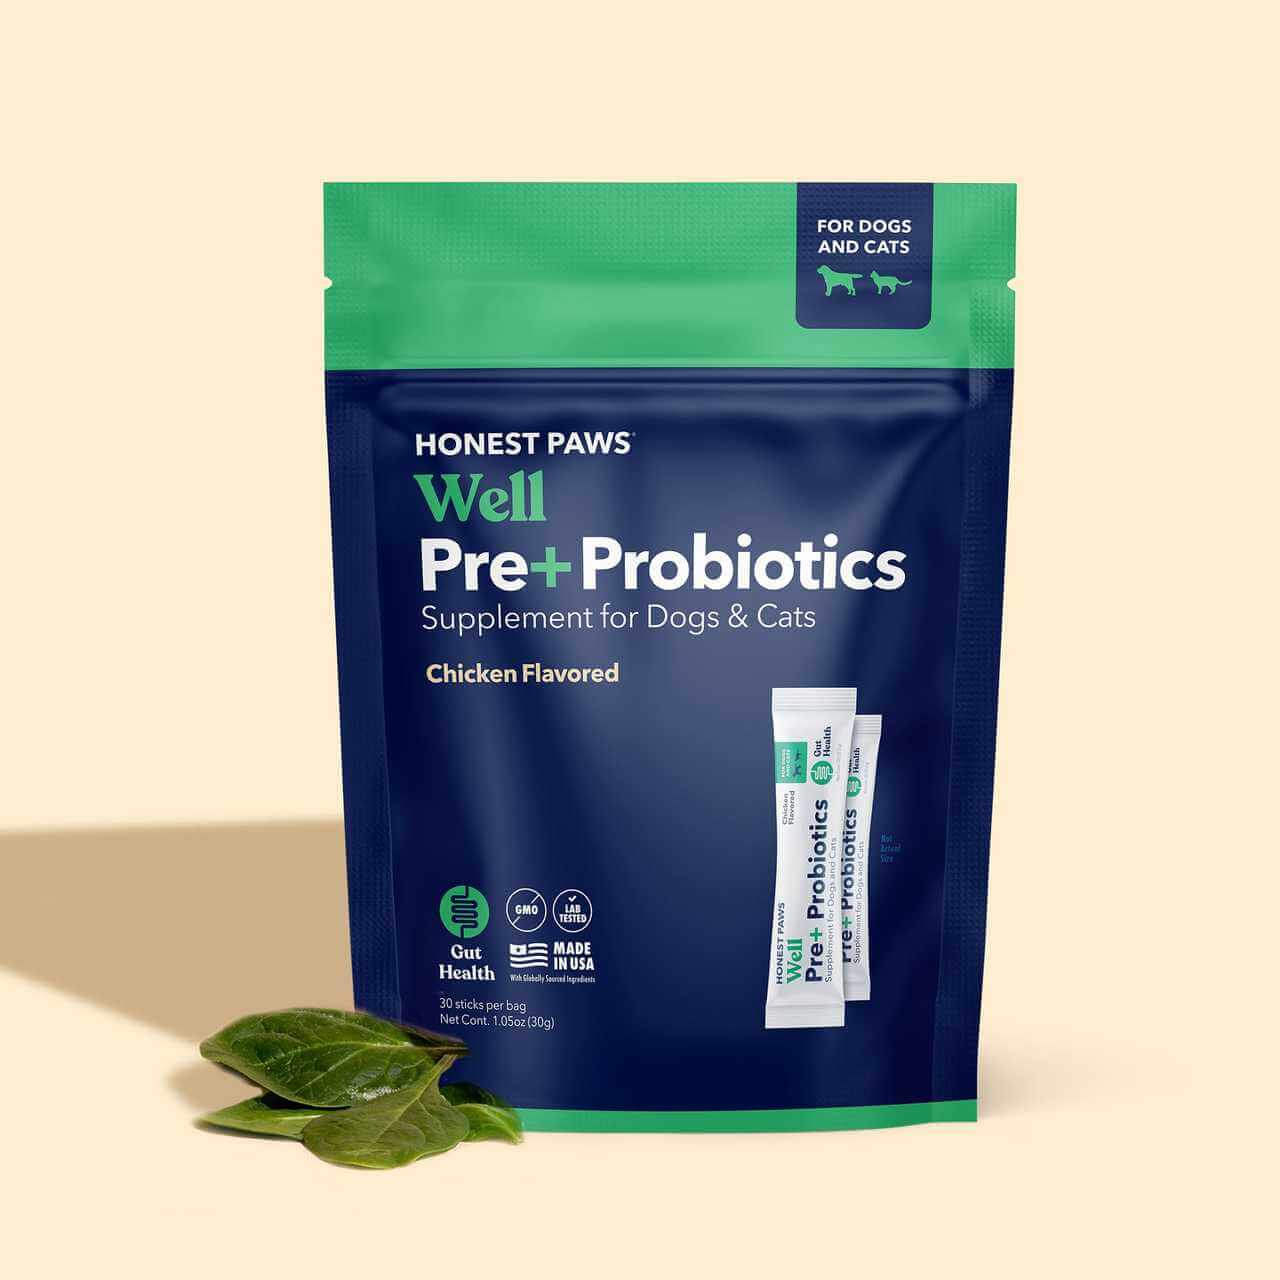 Honest Paws Probiotics for dogs and cats